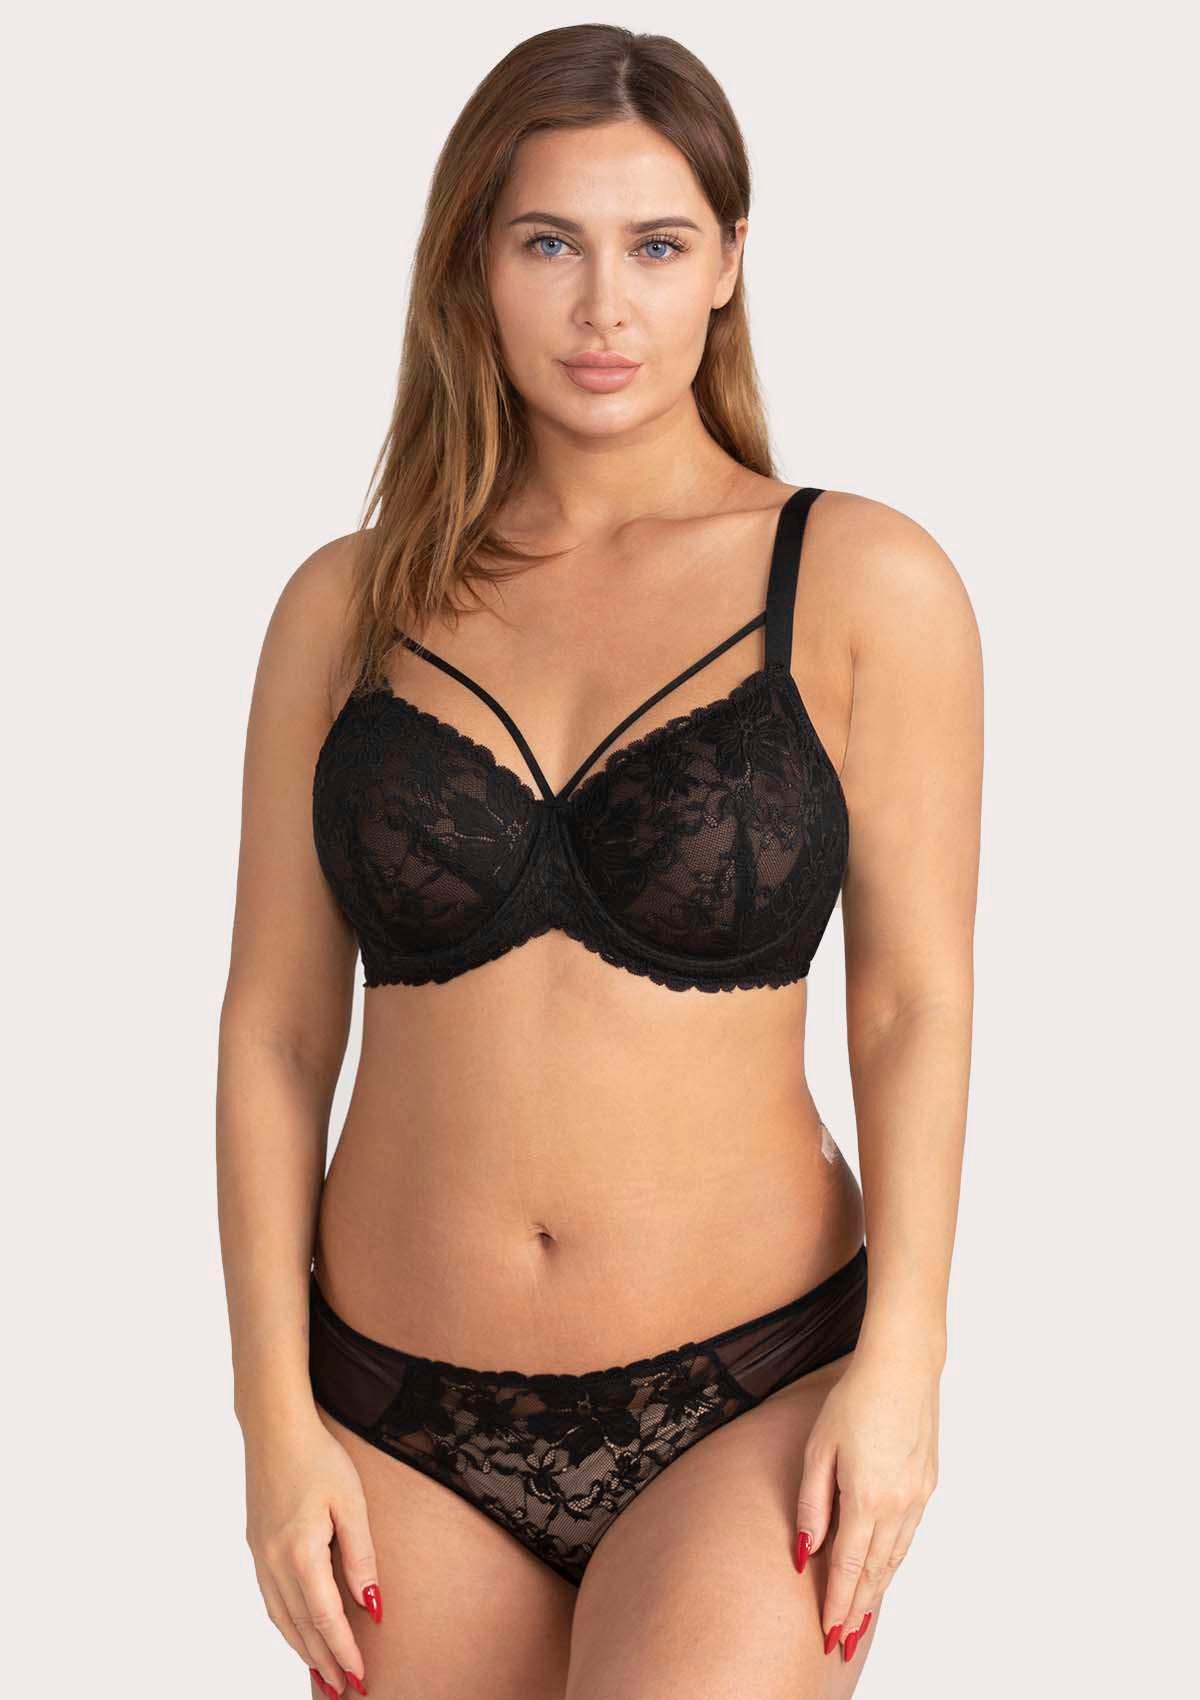 HSIA Pretty In Petals Lace Bra And Panty Set: Non Padded Wired Bra - Black / 46 / I